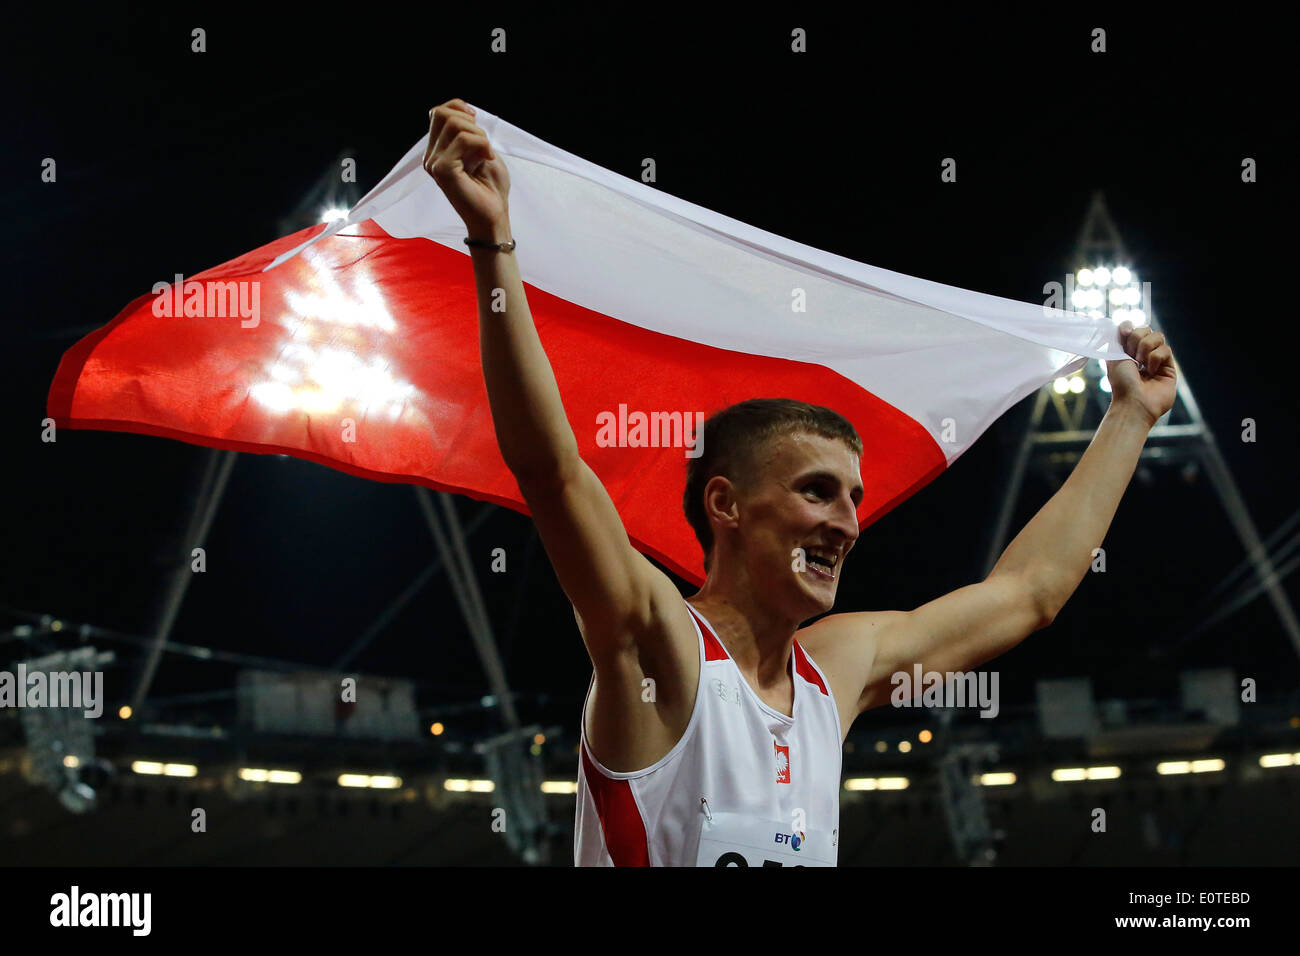 Maciej Lepiato of Poland celebrates winning gold following the men's High Jump - F46 final at the Olympic Stadium during the London 2012 Paralympic Games, London, Britain, 08 September 2012. Stock Photo